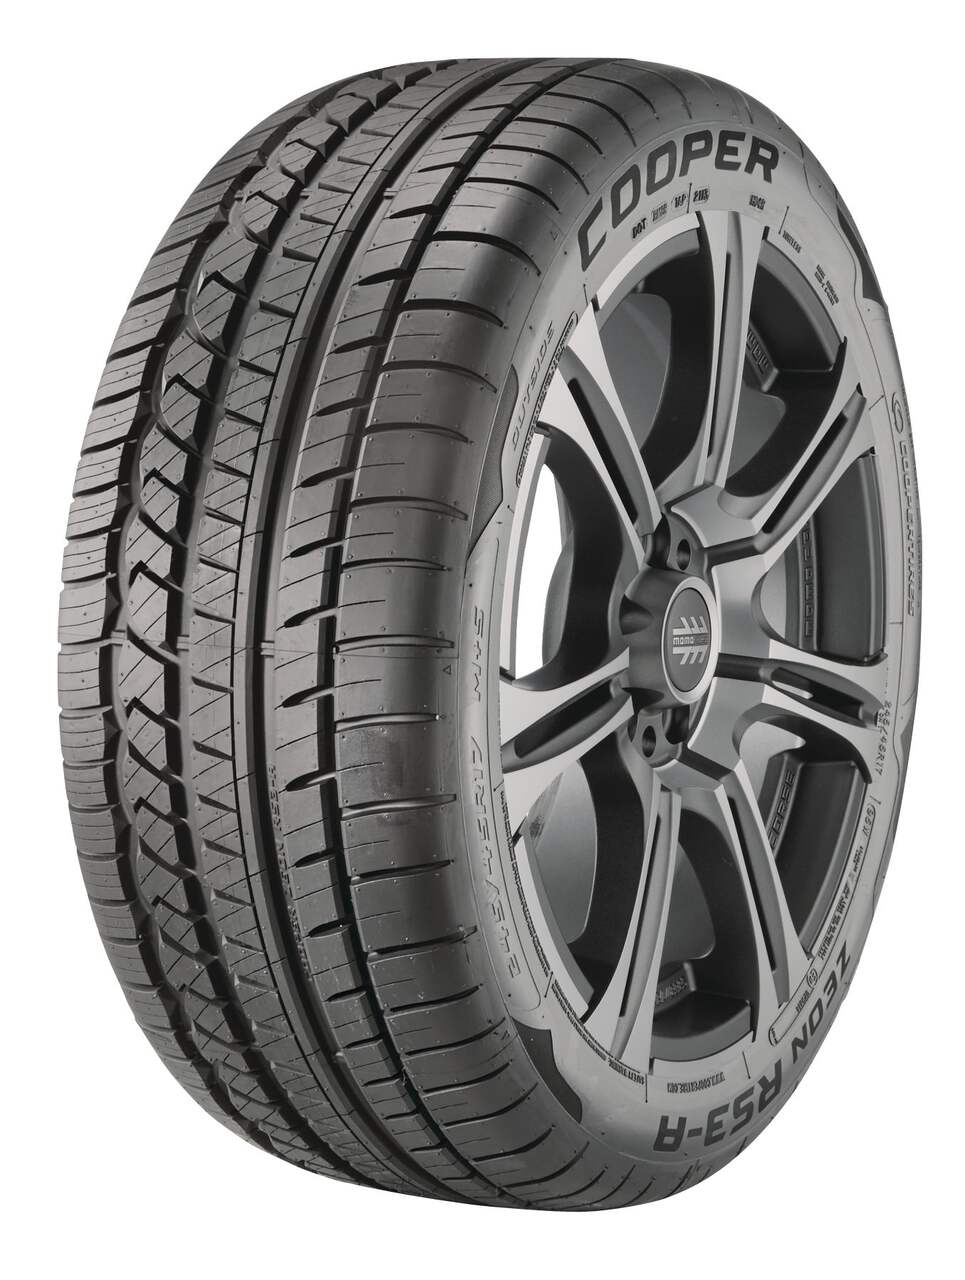 COOPER TIRES ZEON RS3 A 215/50 R 17 95W